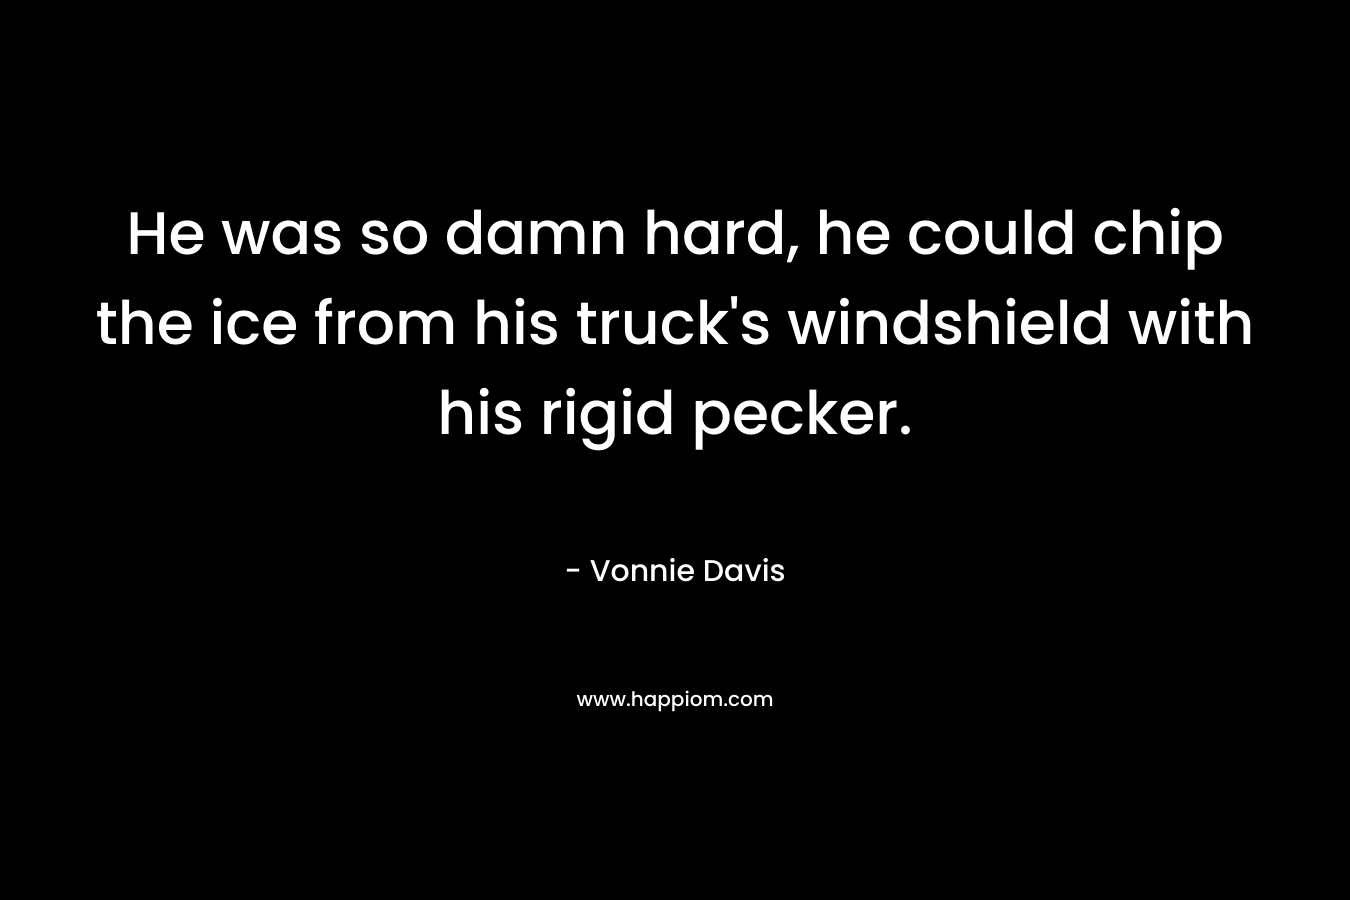 He was so damn hard, he could chip the ice from his truck’s windshield with his rigid pecker. – Vonnie Davis